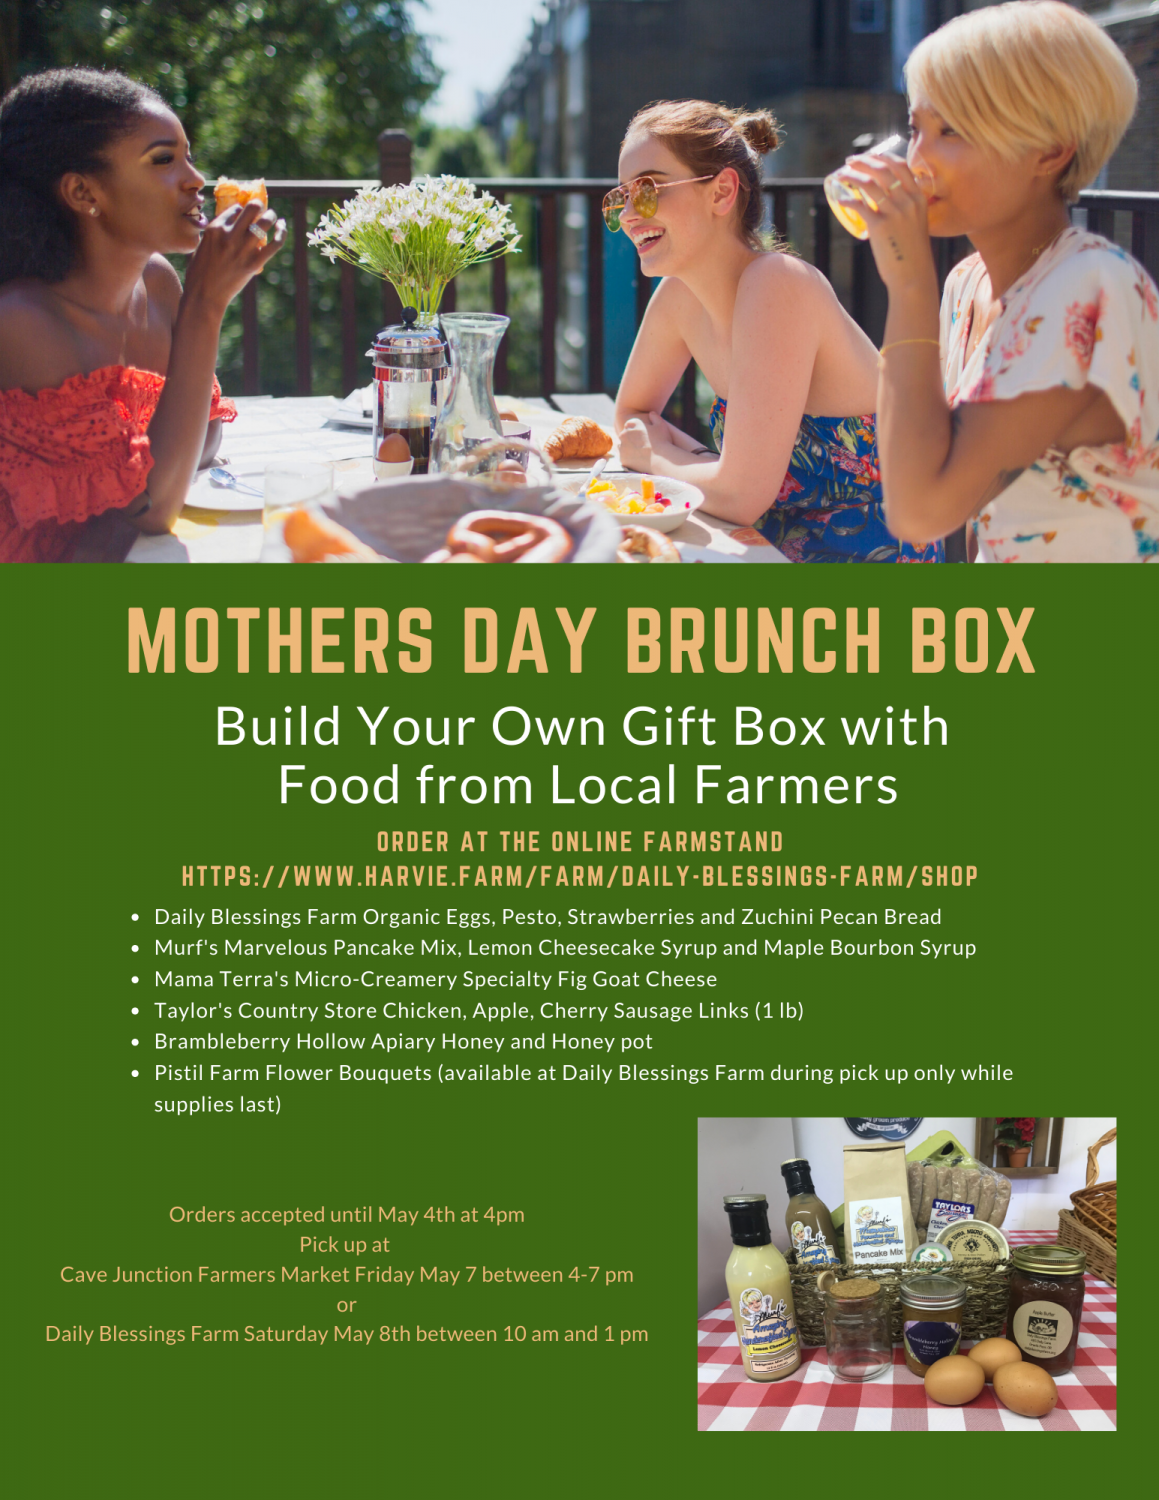 Previous Happening: Order Your Mothers Day Brunch Box Today!